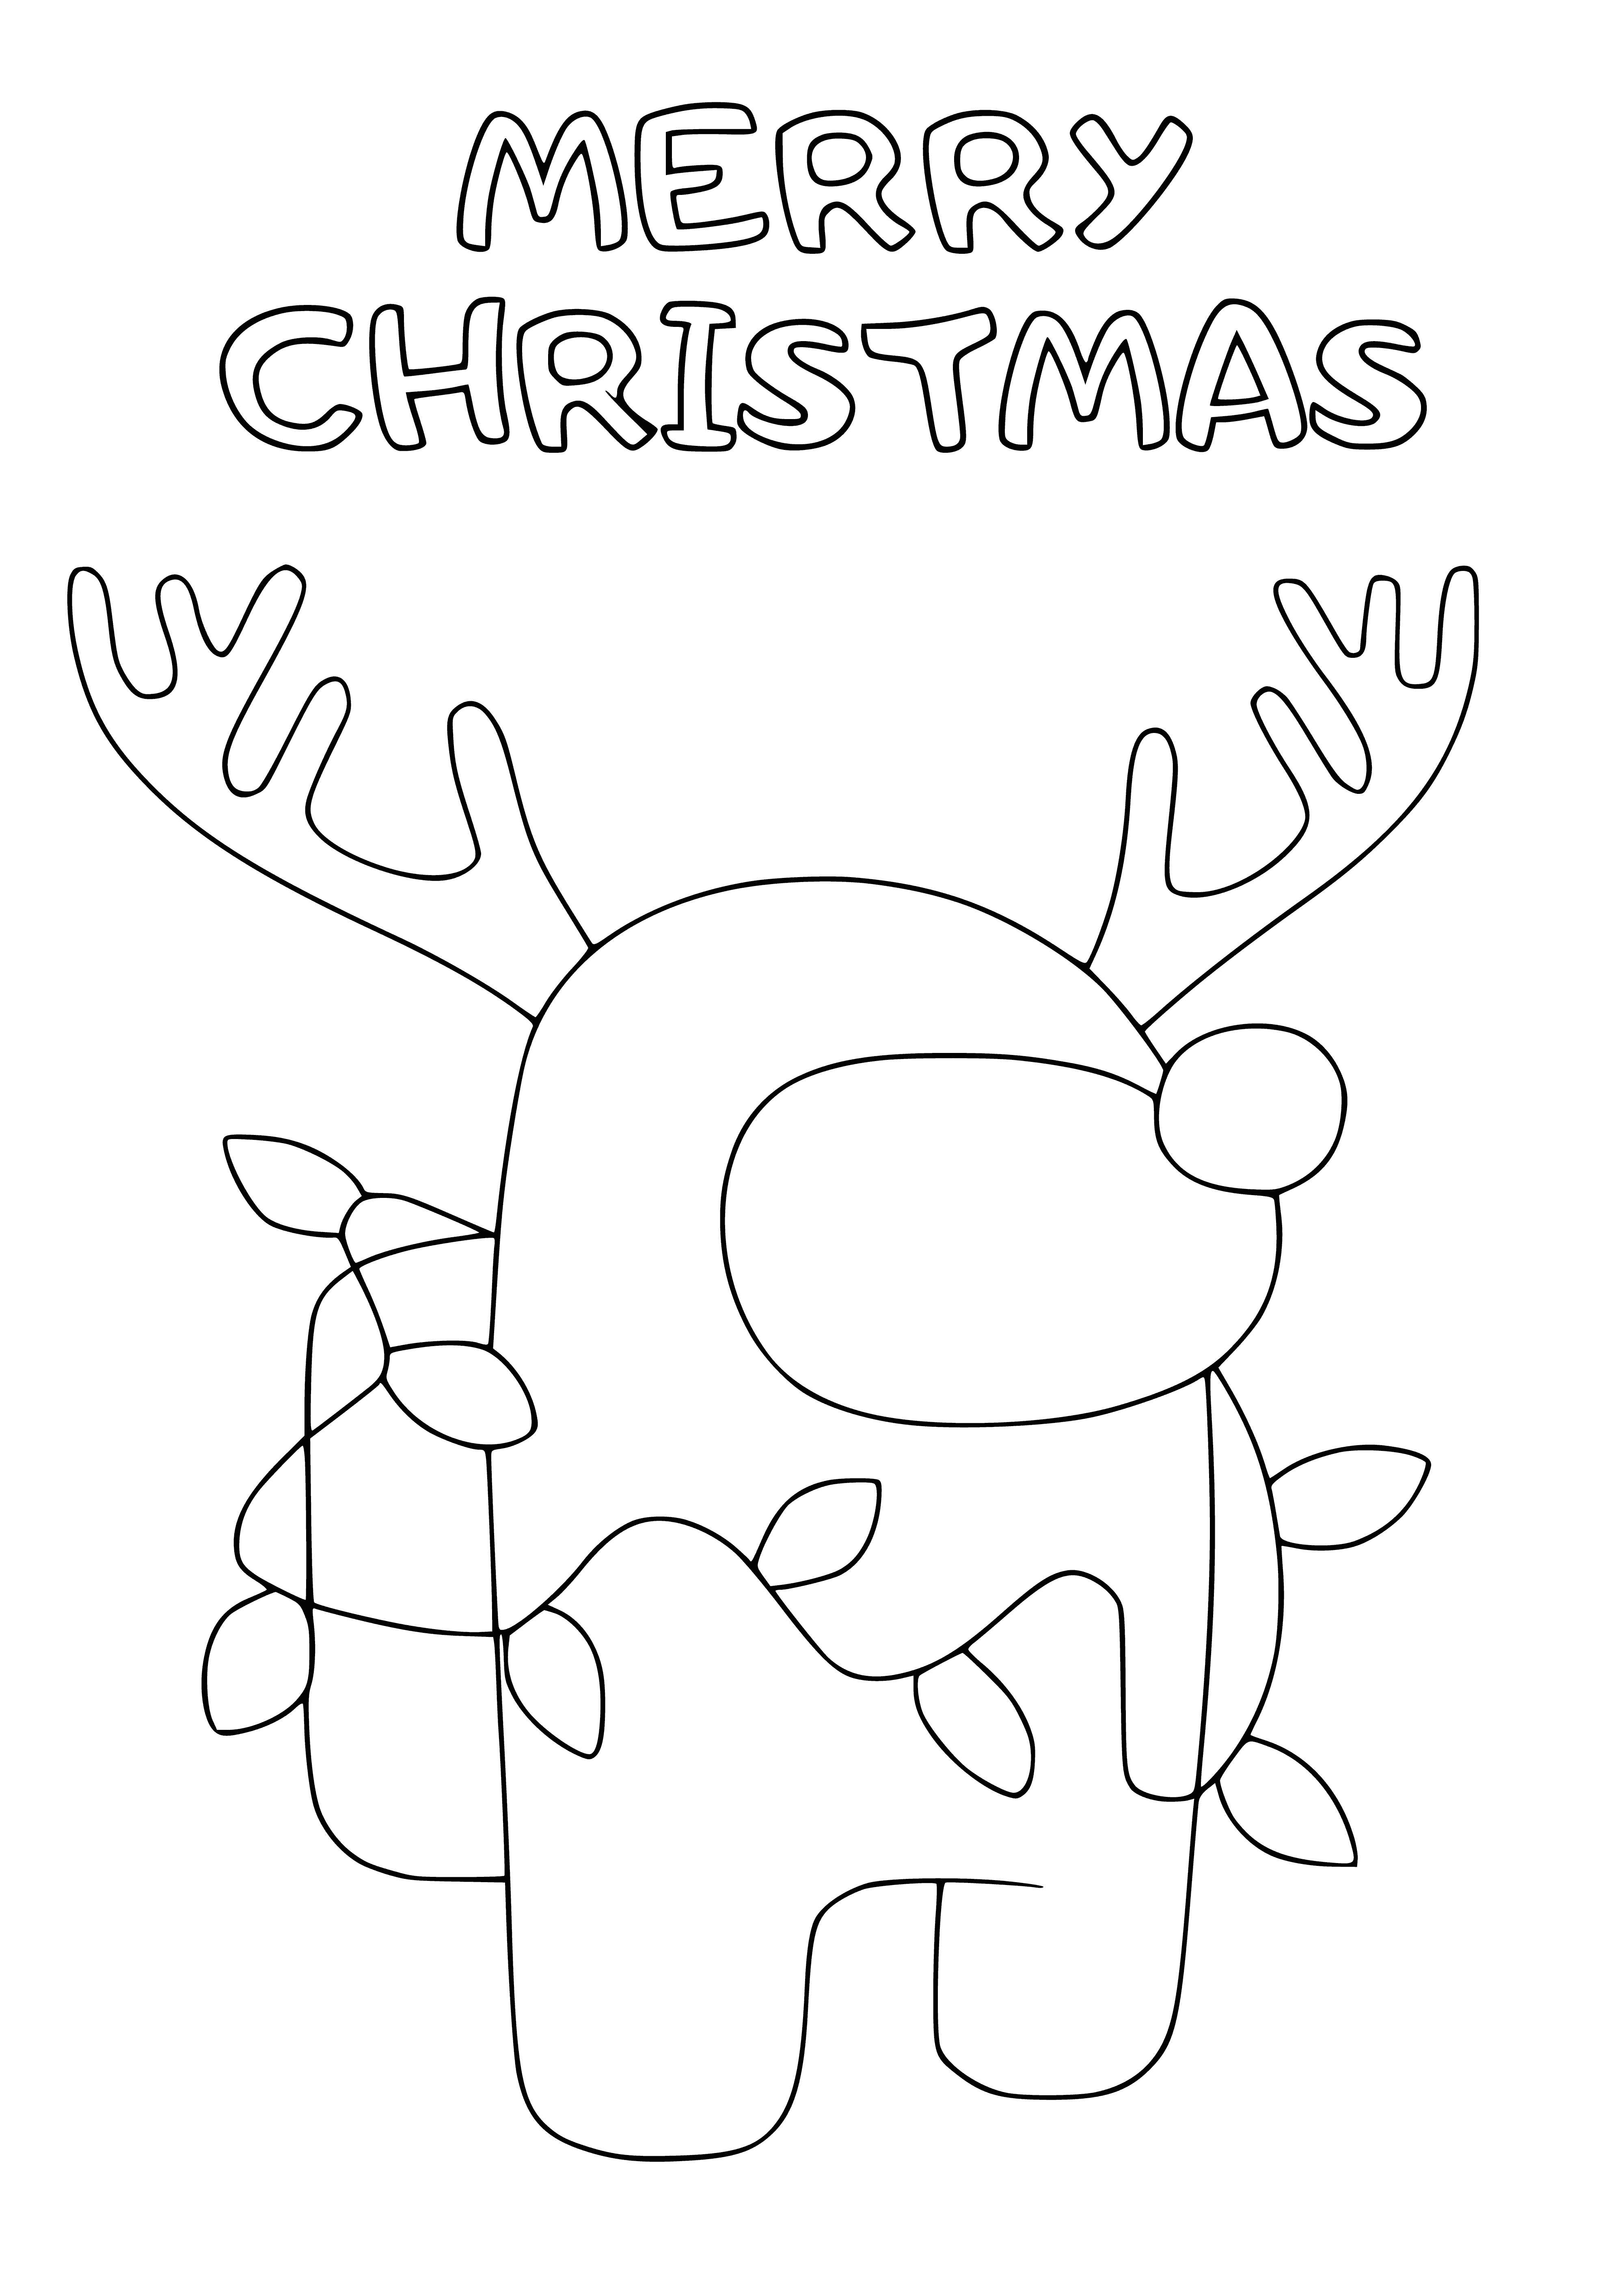 coloring page: 3 orange & 1 white Among Us characters standing on blue surface with stars; white character holds blue object.